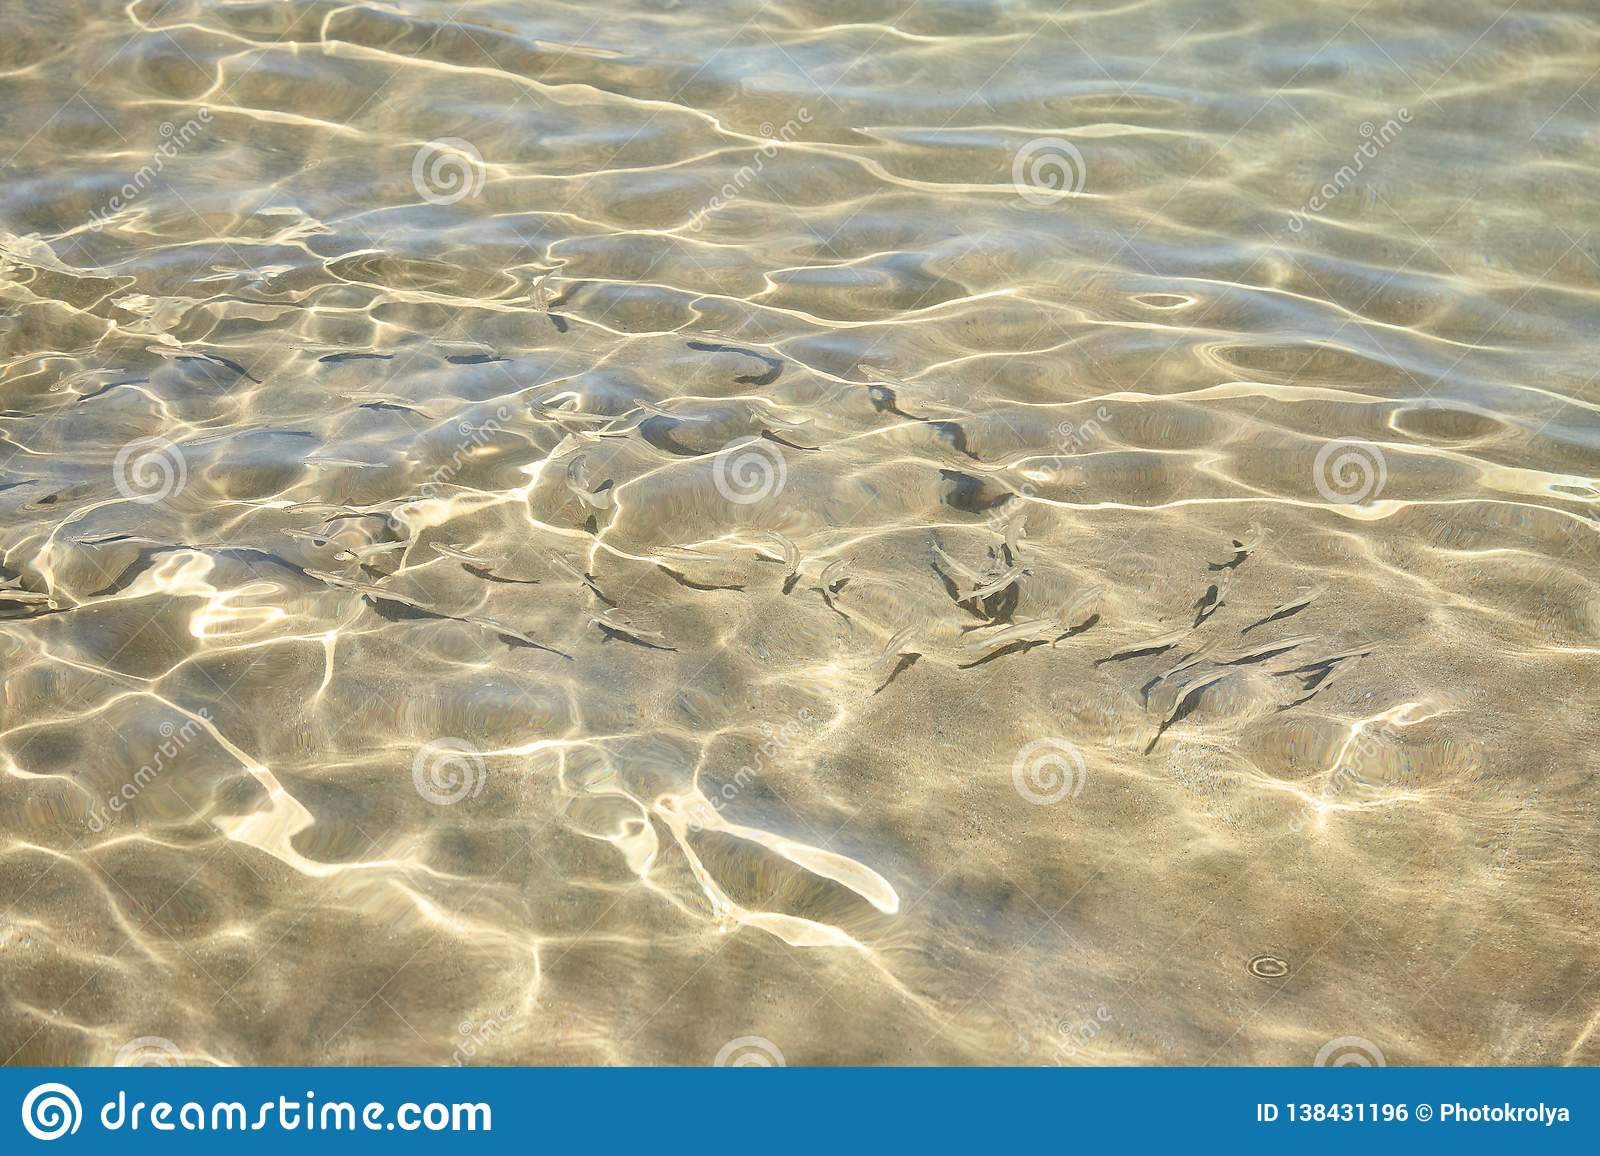 Which are small sea fish they are found in the shallow water or near the beach?